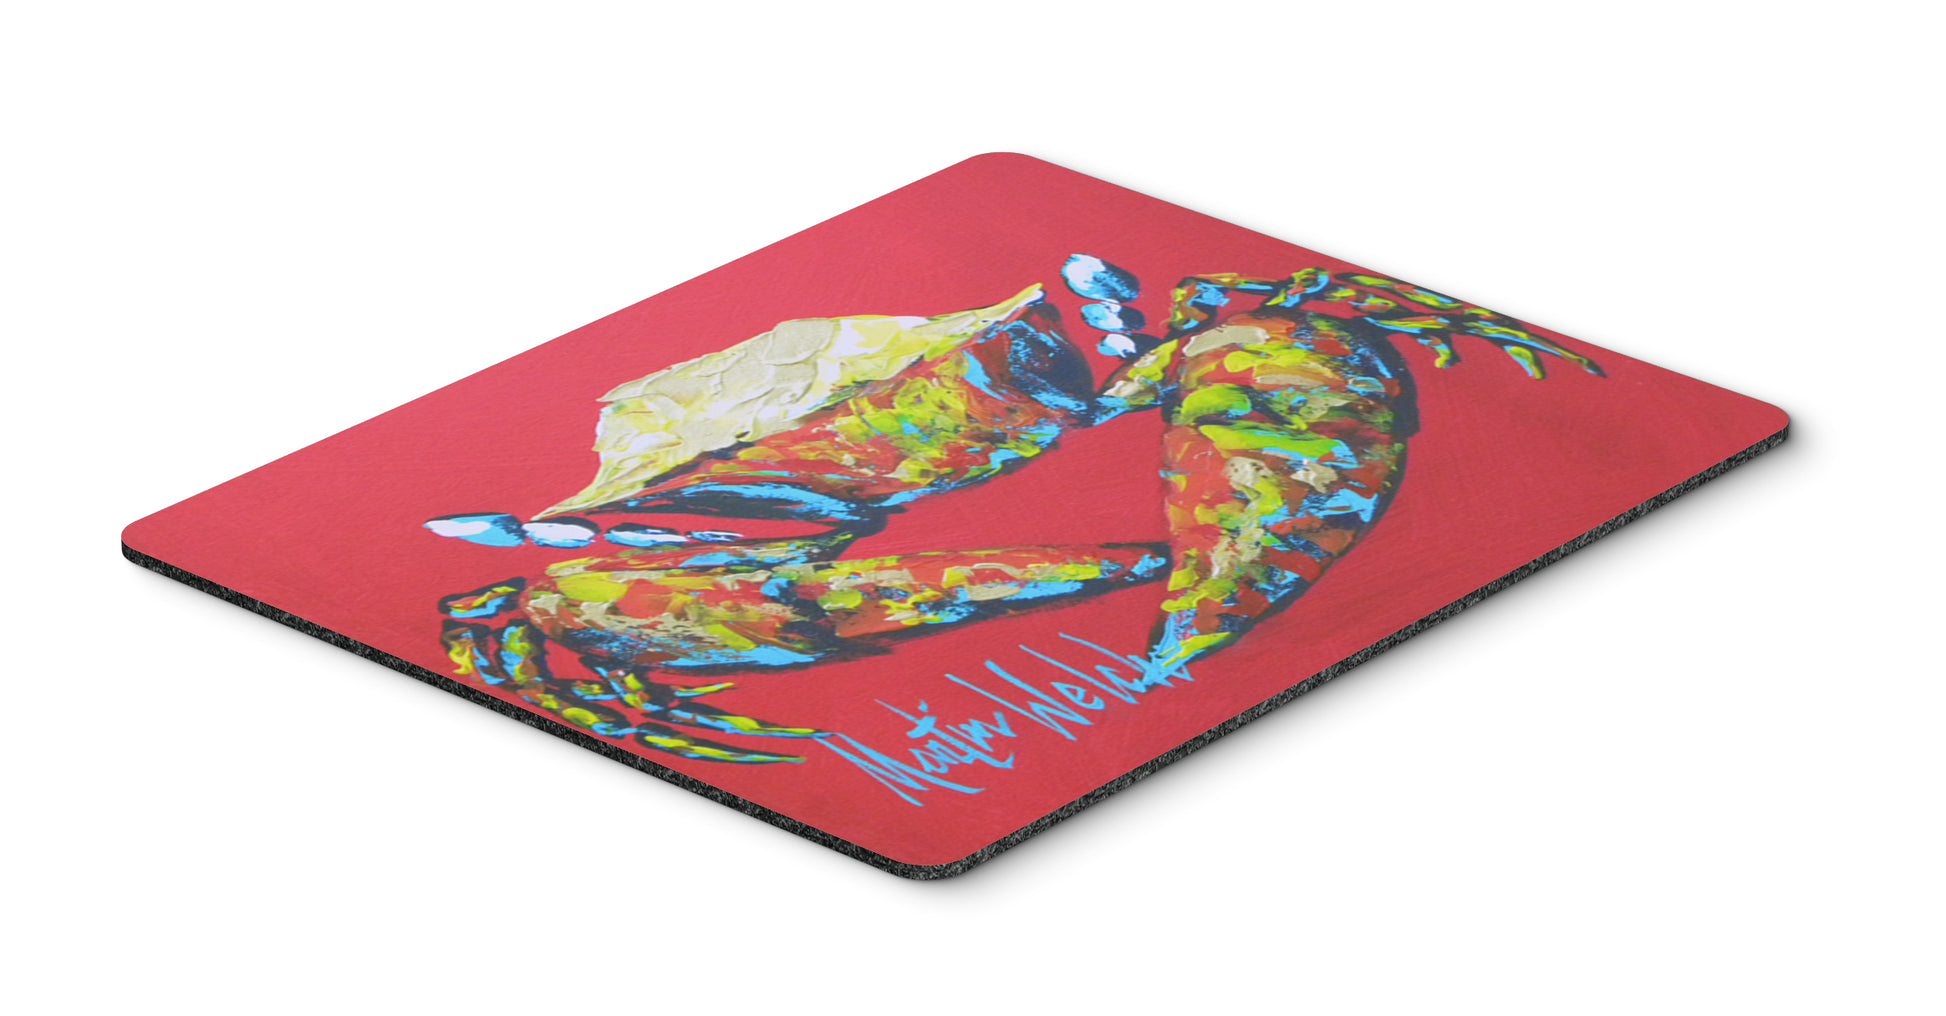 Buy this Crab Seafood One Mouse Pad, Hot Pad or Trivet